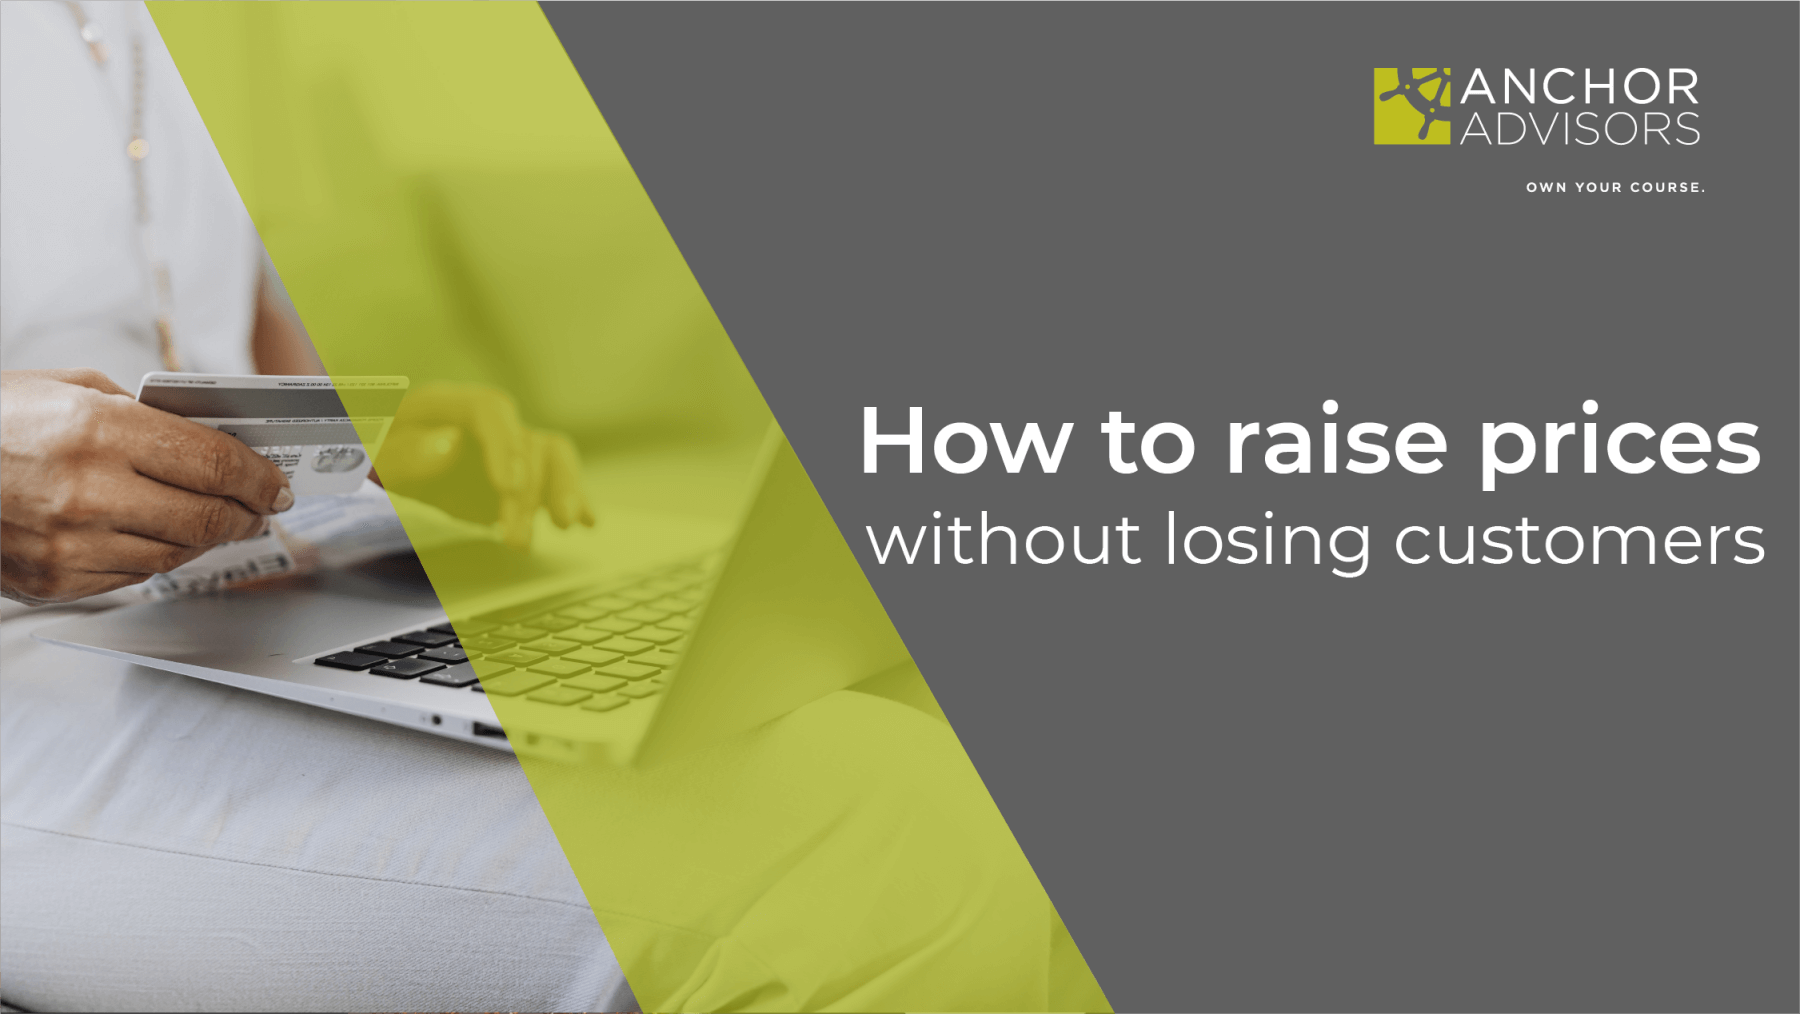 How to raise prices without losing customers